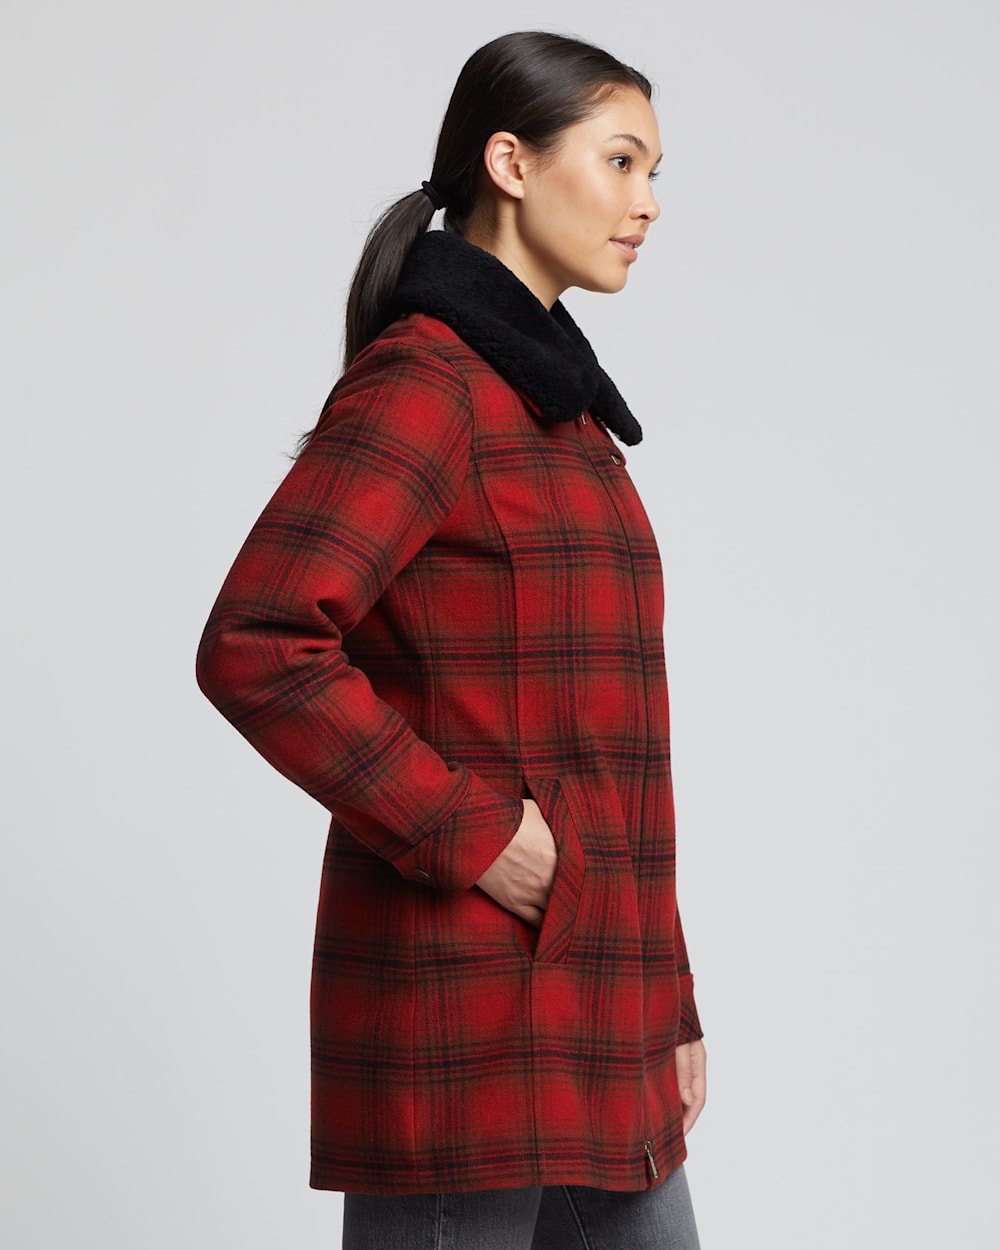 ALTERNATE VIEW OF WOMEN'S LAFAYETTE SHEARLING-COLLAR COAT IN RED/CHARCOAL/DEEP OLIVE PLAID image number 2